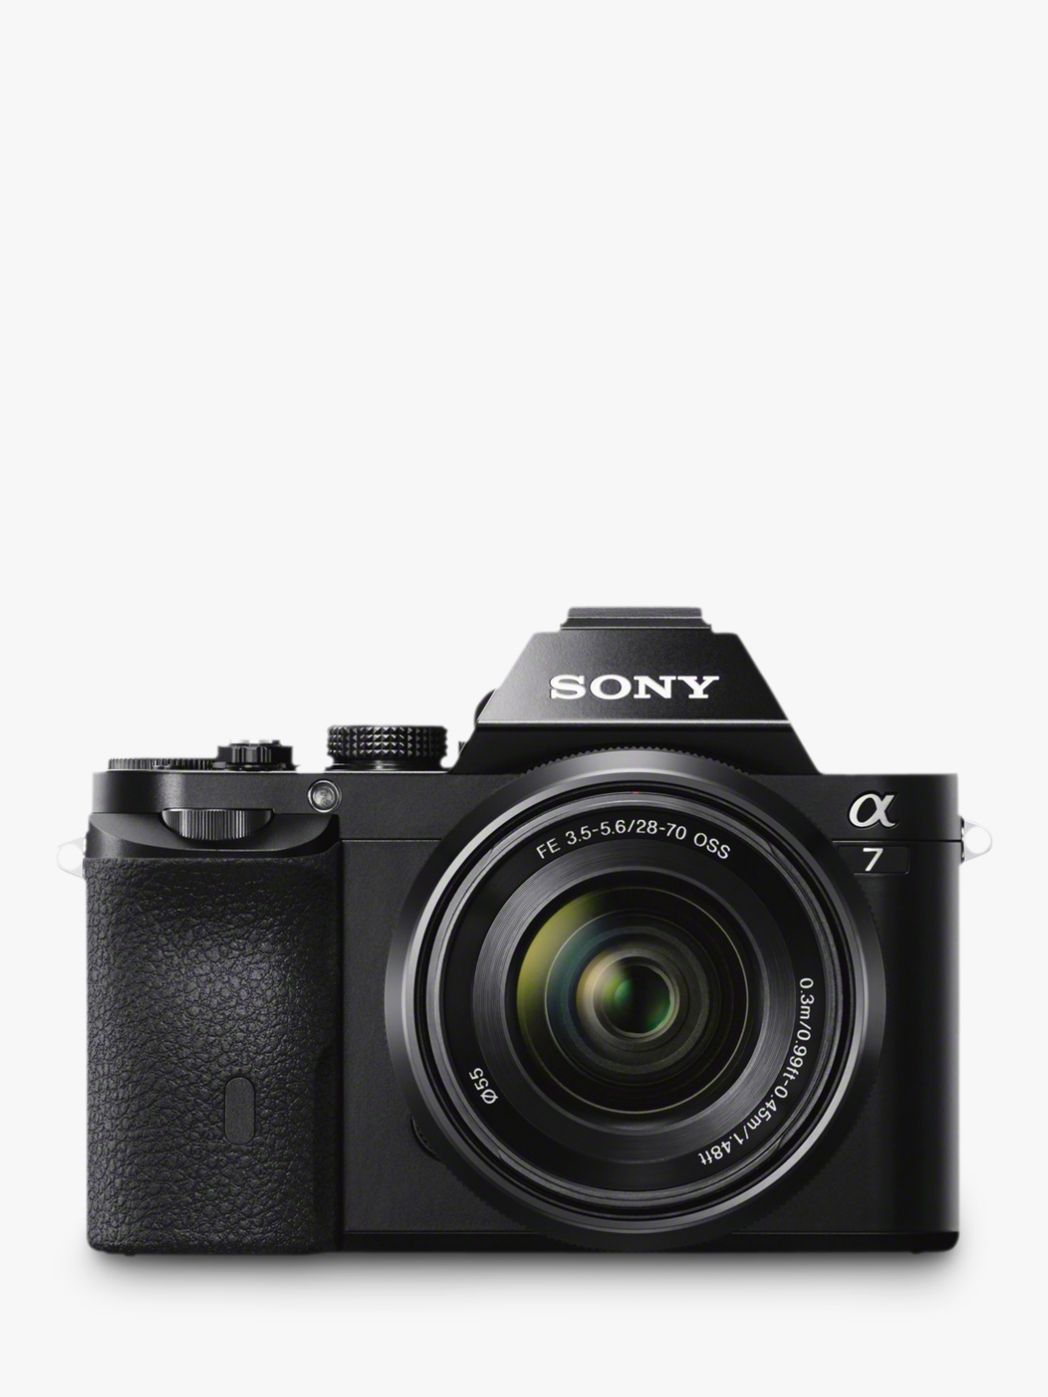 Sony a7 (Alpha ILCE-7K) Compact System Camera with 28-70mm Lens, HD 1080p, 24.3MP, Wi-Fi, NFC, OLED EVF, 3” Screen